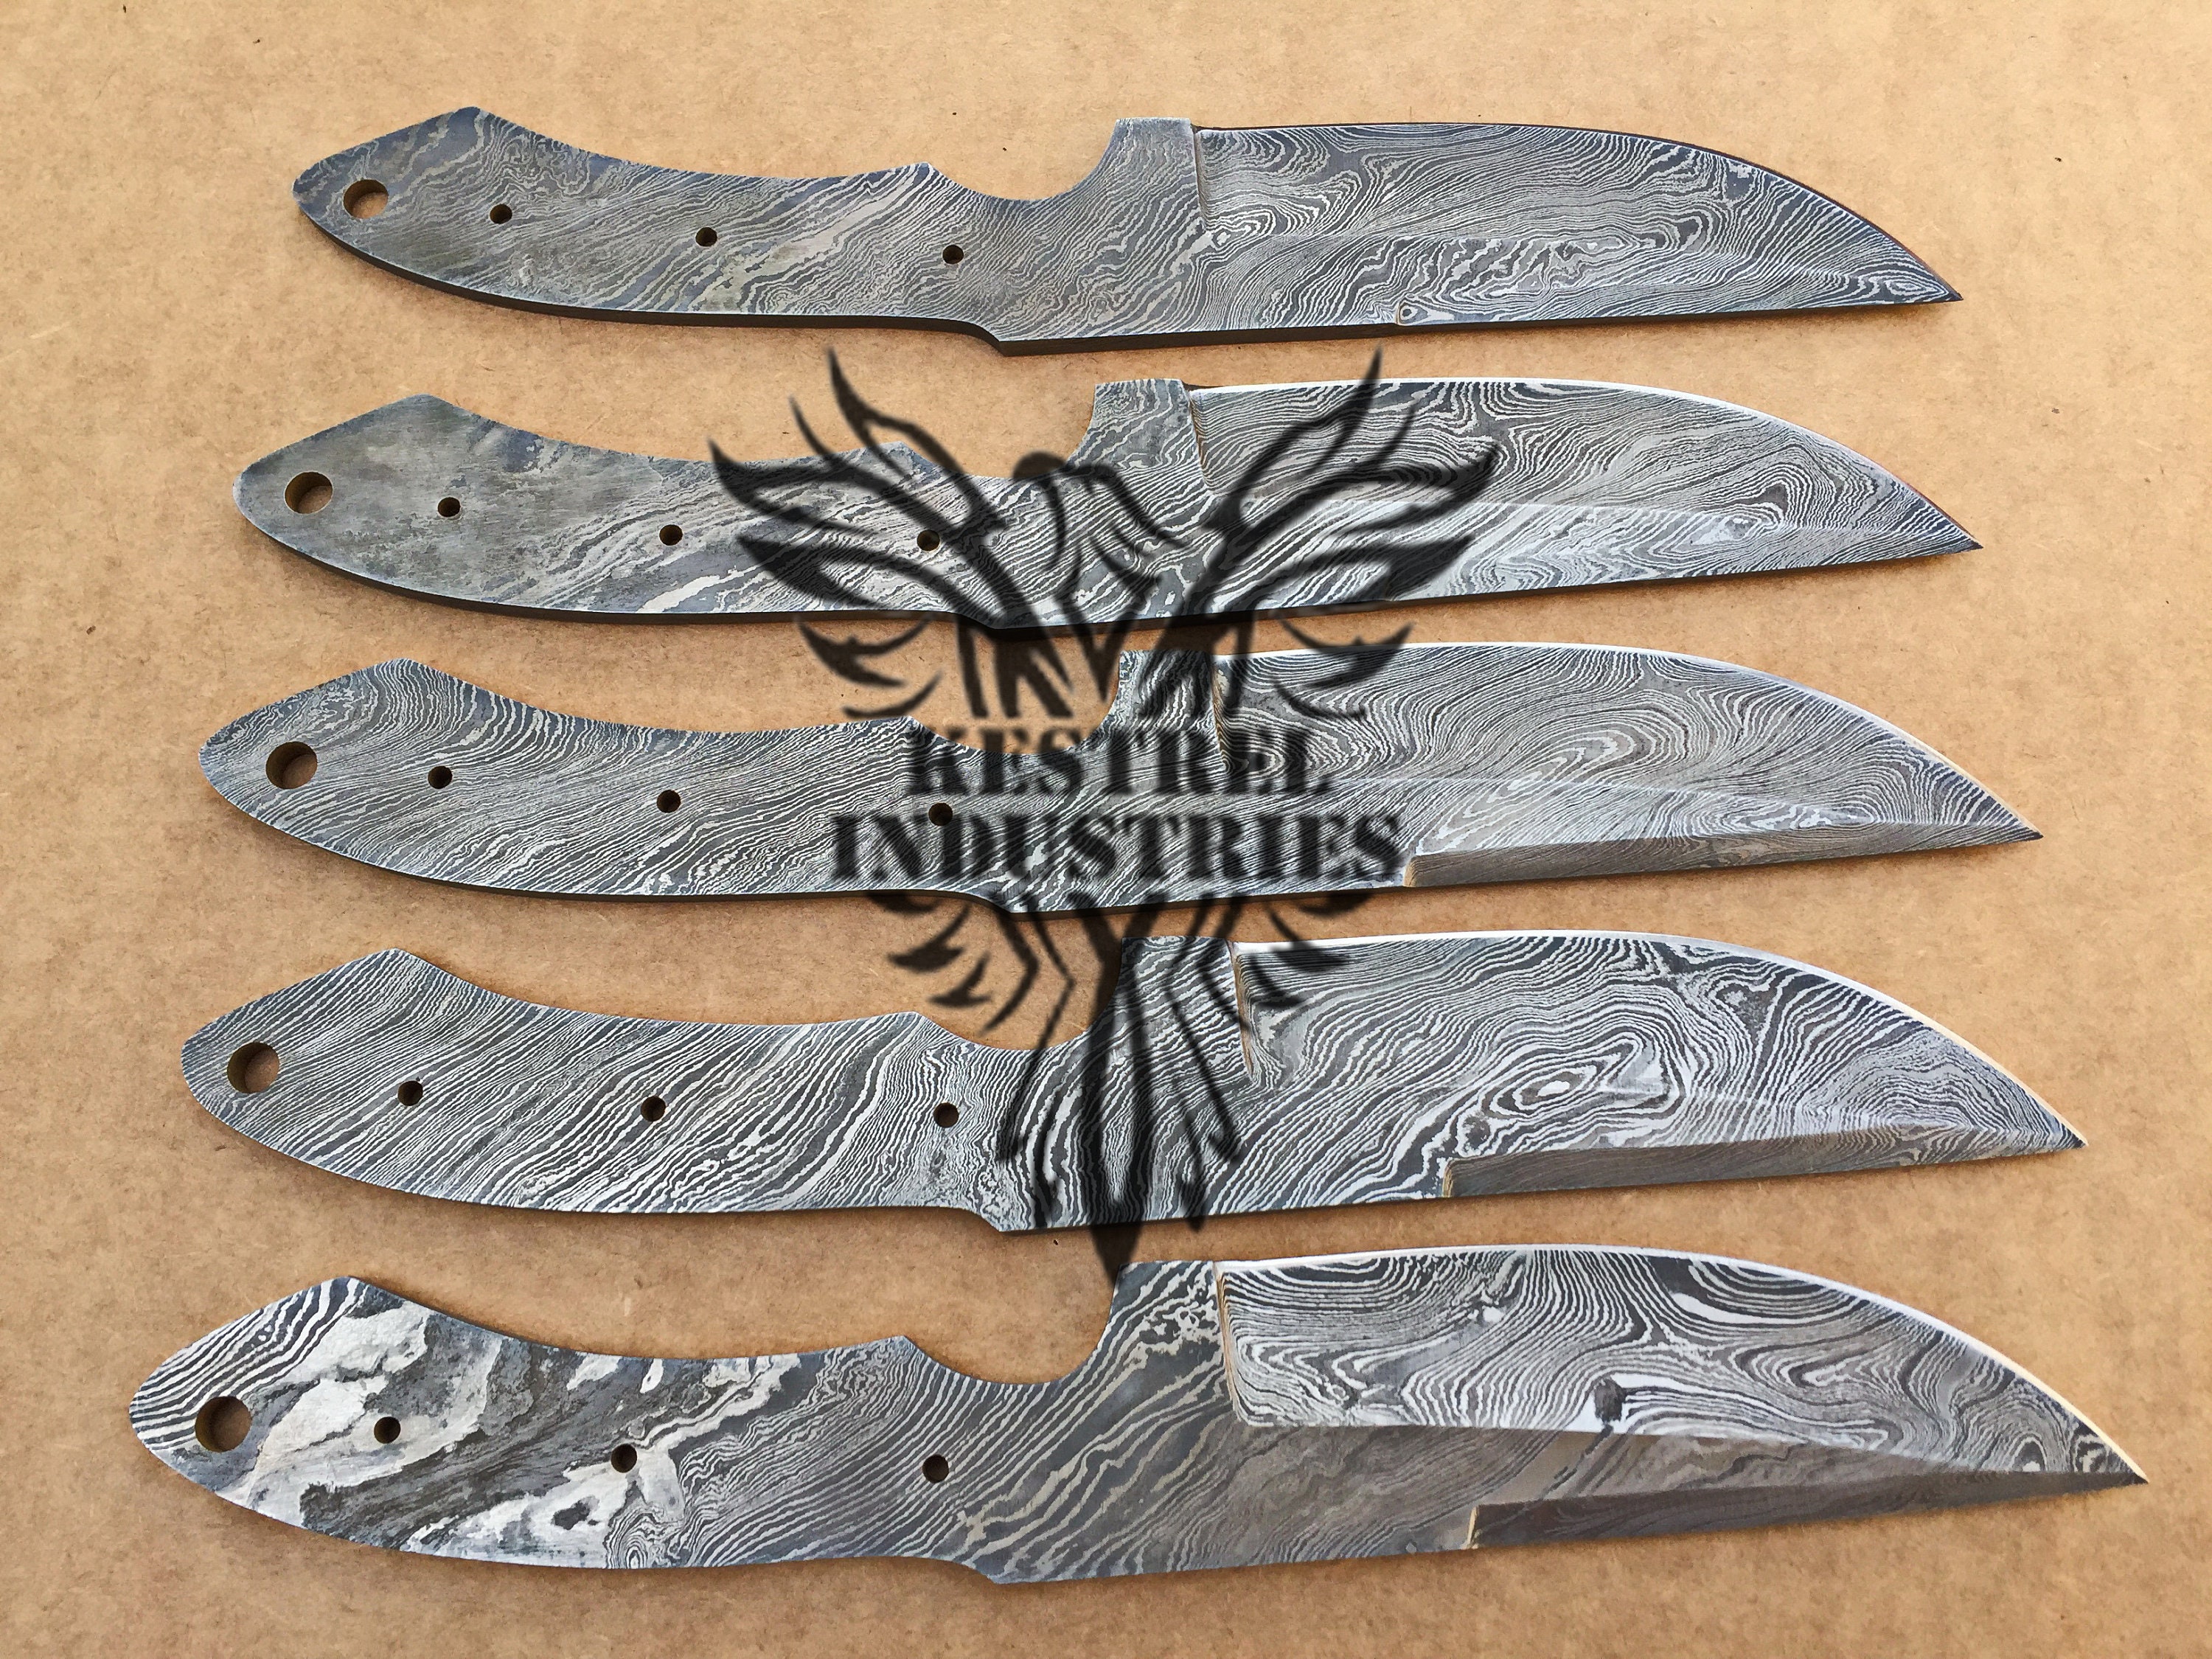 Lot of 5 Damascus Steel Blank Blade Knife for Knife Making Supplies SU-139  